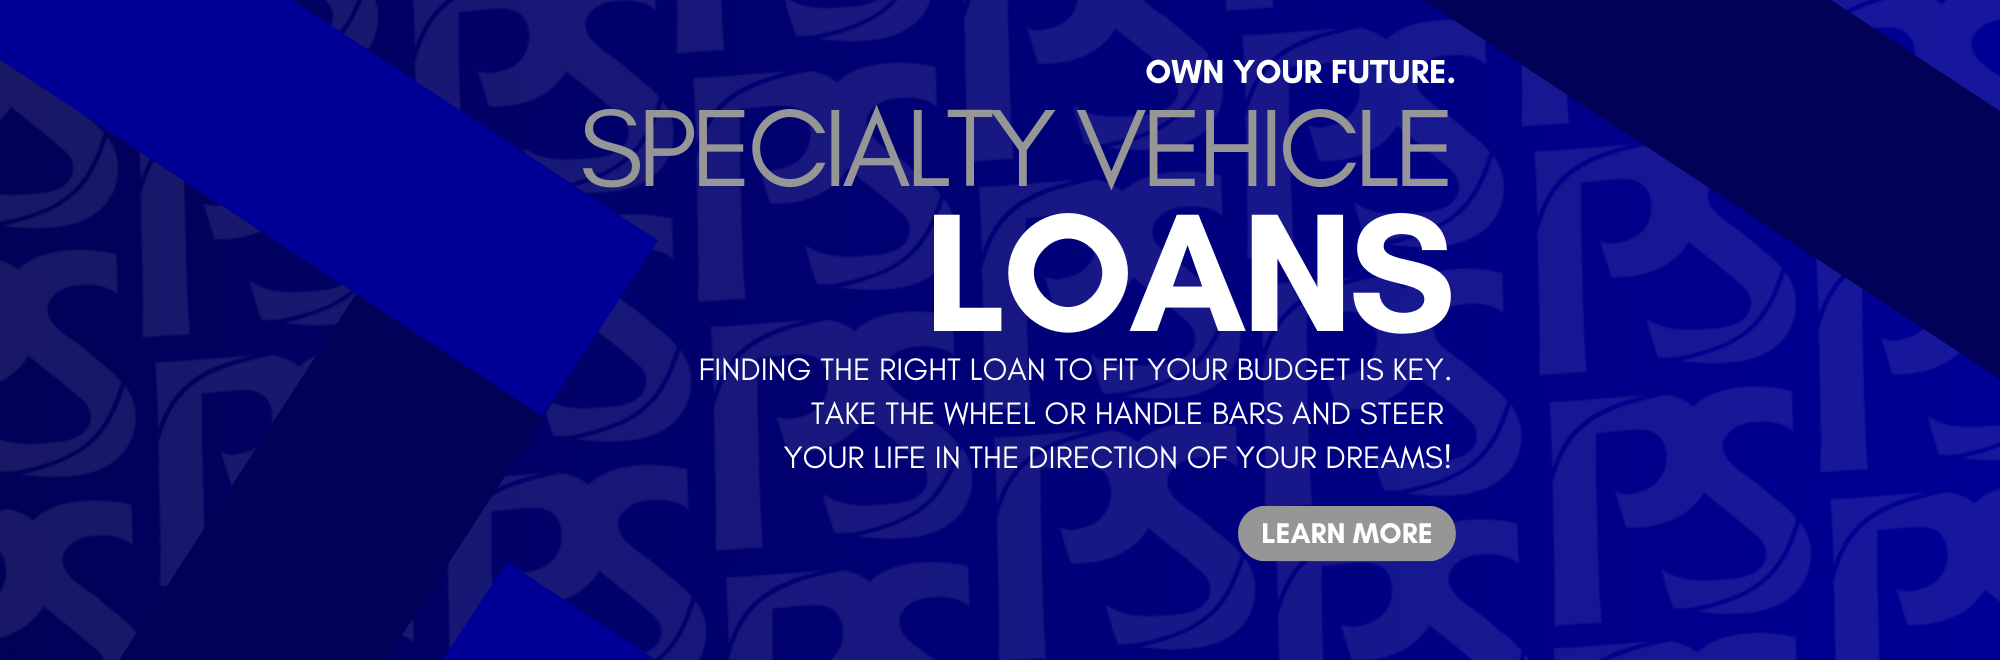 Own your Future. Specialty Vehicle Loans. FINDING THE RIGHT AUTO LOAN TO FIT YOUR BUDGET IS KEY. Take the wheel or handle bars and steer your life in the direction of your dreams!